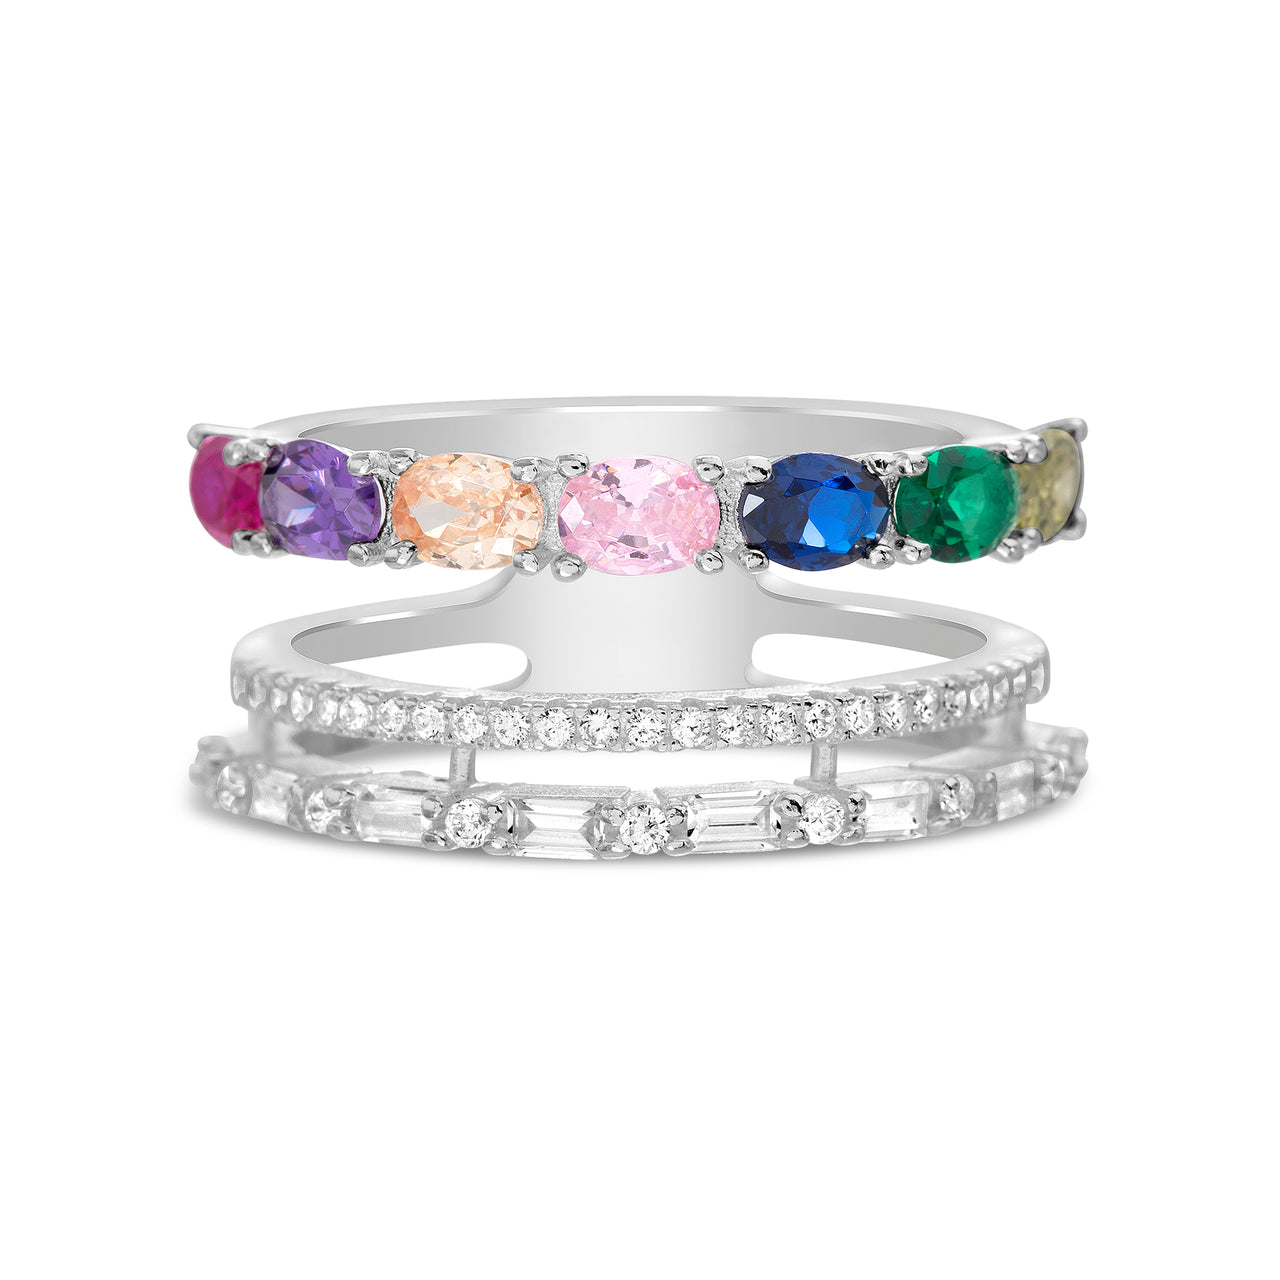 Lesa Michele Rainbow Cubic Zirconia Layer Band Ring in Sterling Silver